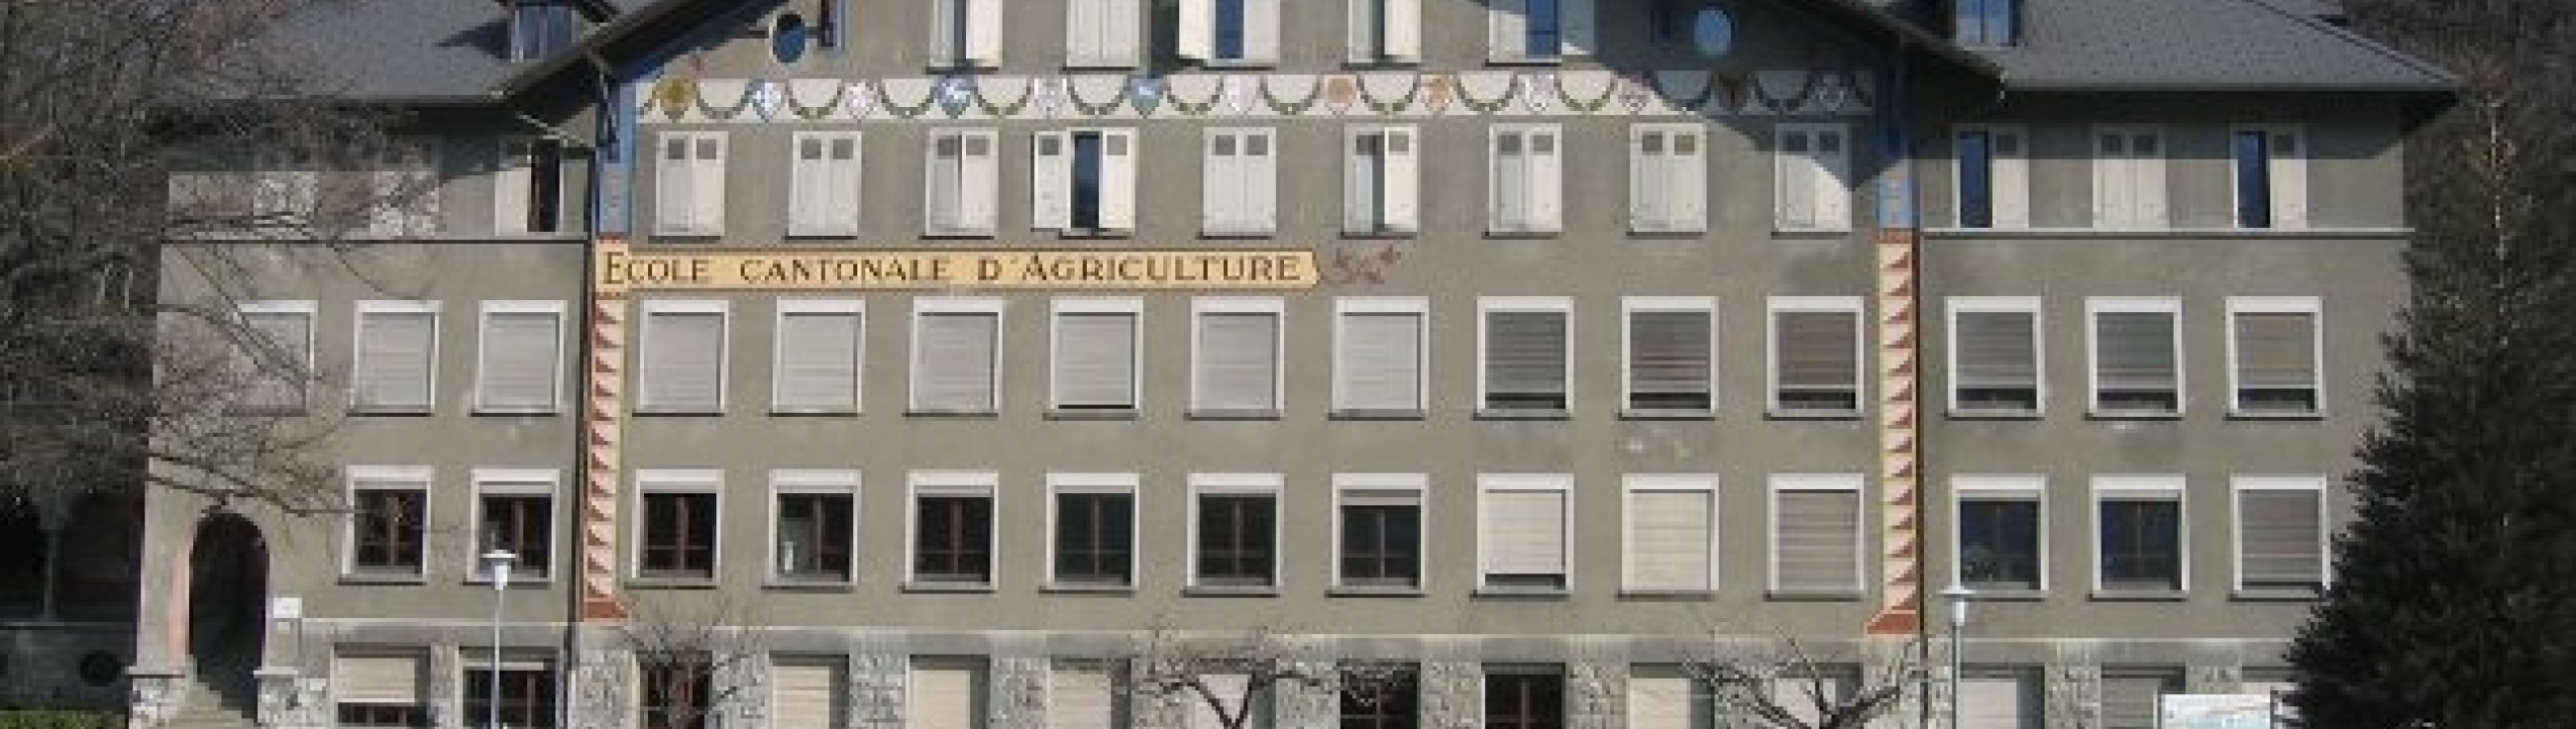 Ecole Agriculture